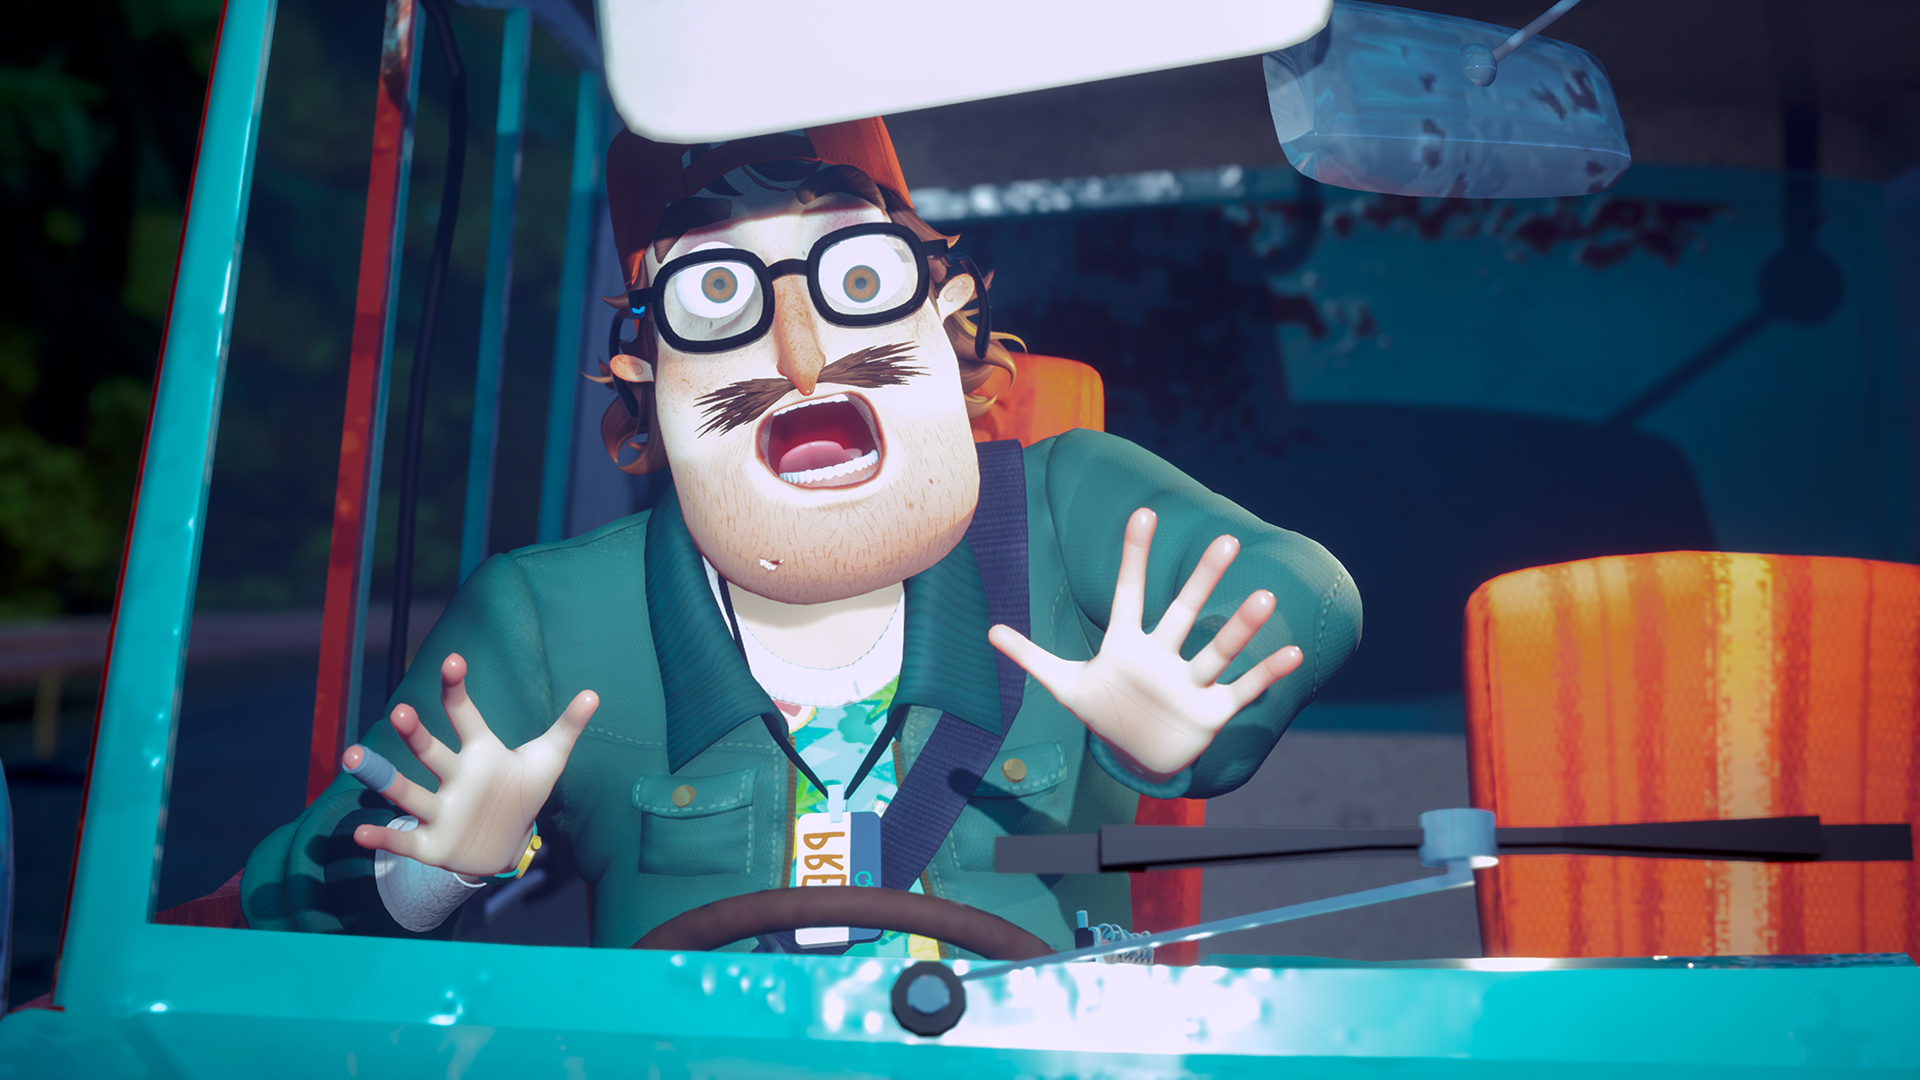 Hello Neighbor 2 (Game): A local journalist named Quentin, A central protagonist. 1920x1080 Full HD Wallpaper.